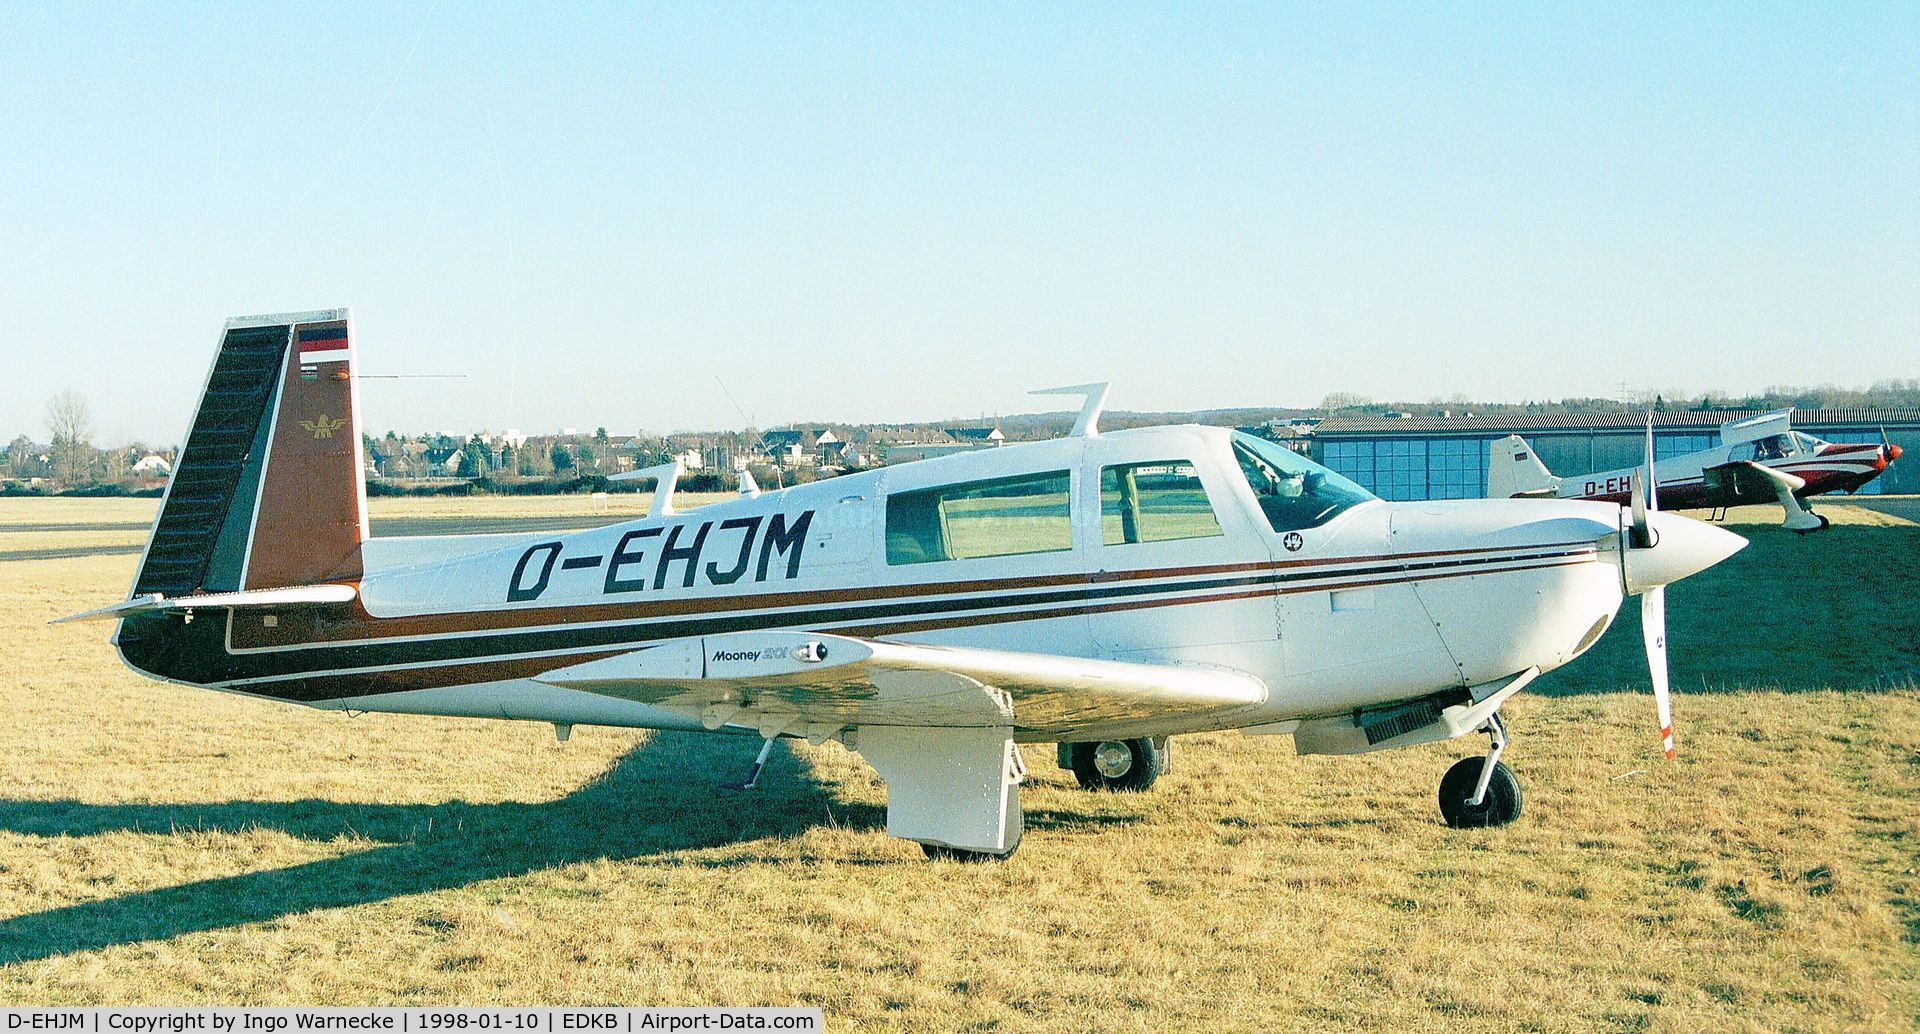 D-EHJM, 1977 Mooney M20J 201 C/N 24-0190, Mooney M20J Model 201 at Bonn-Hangelar airfield